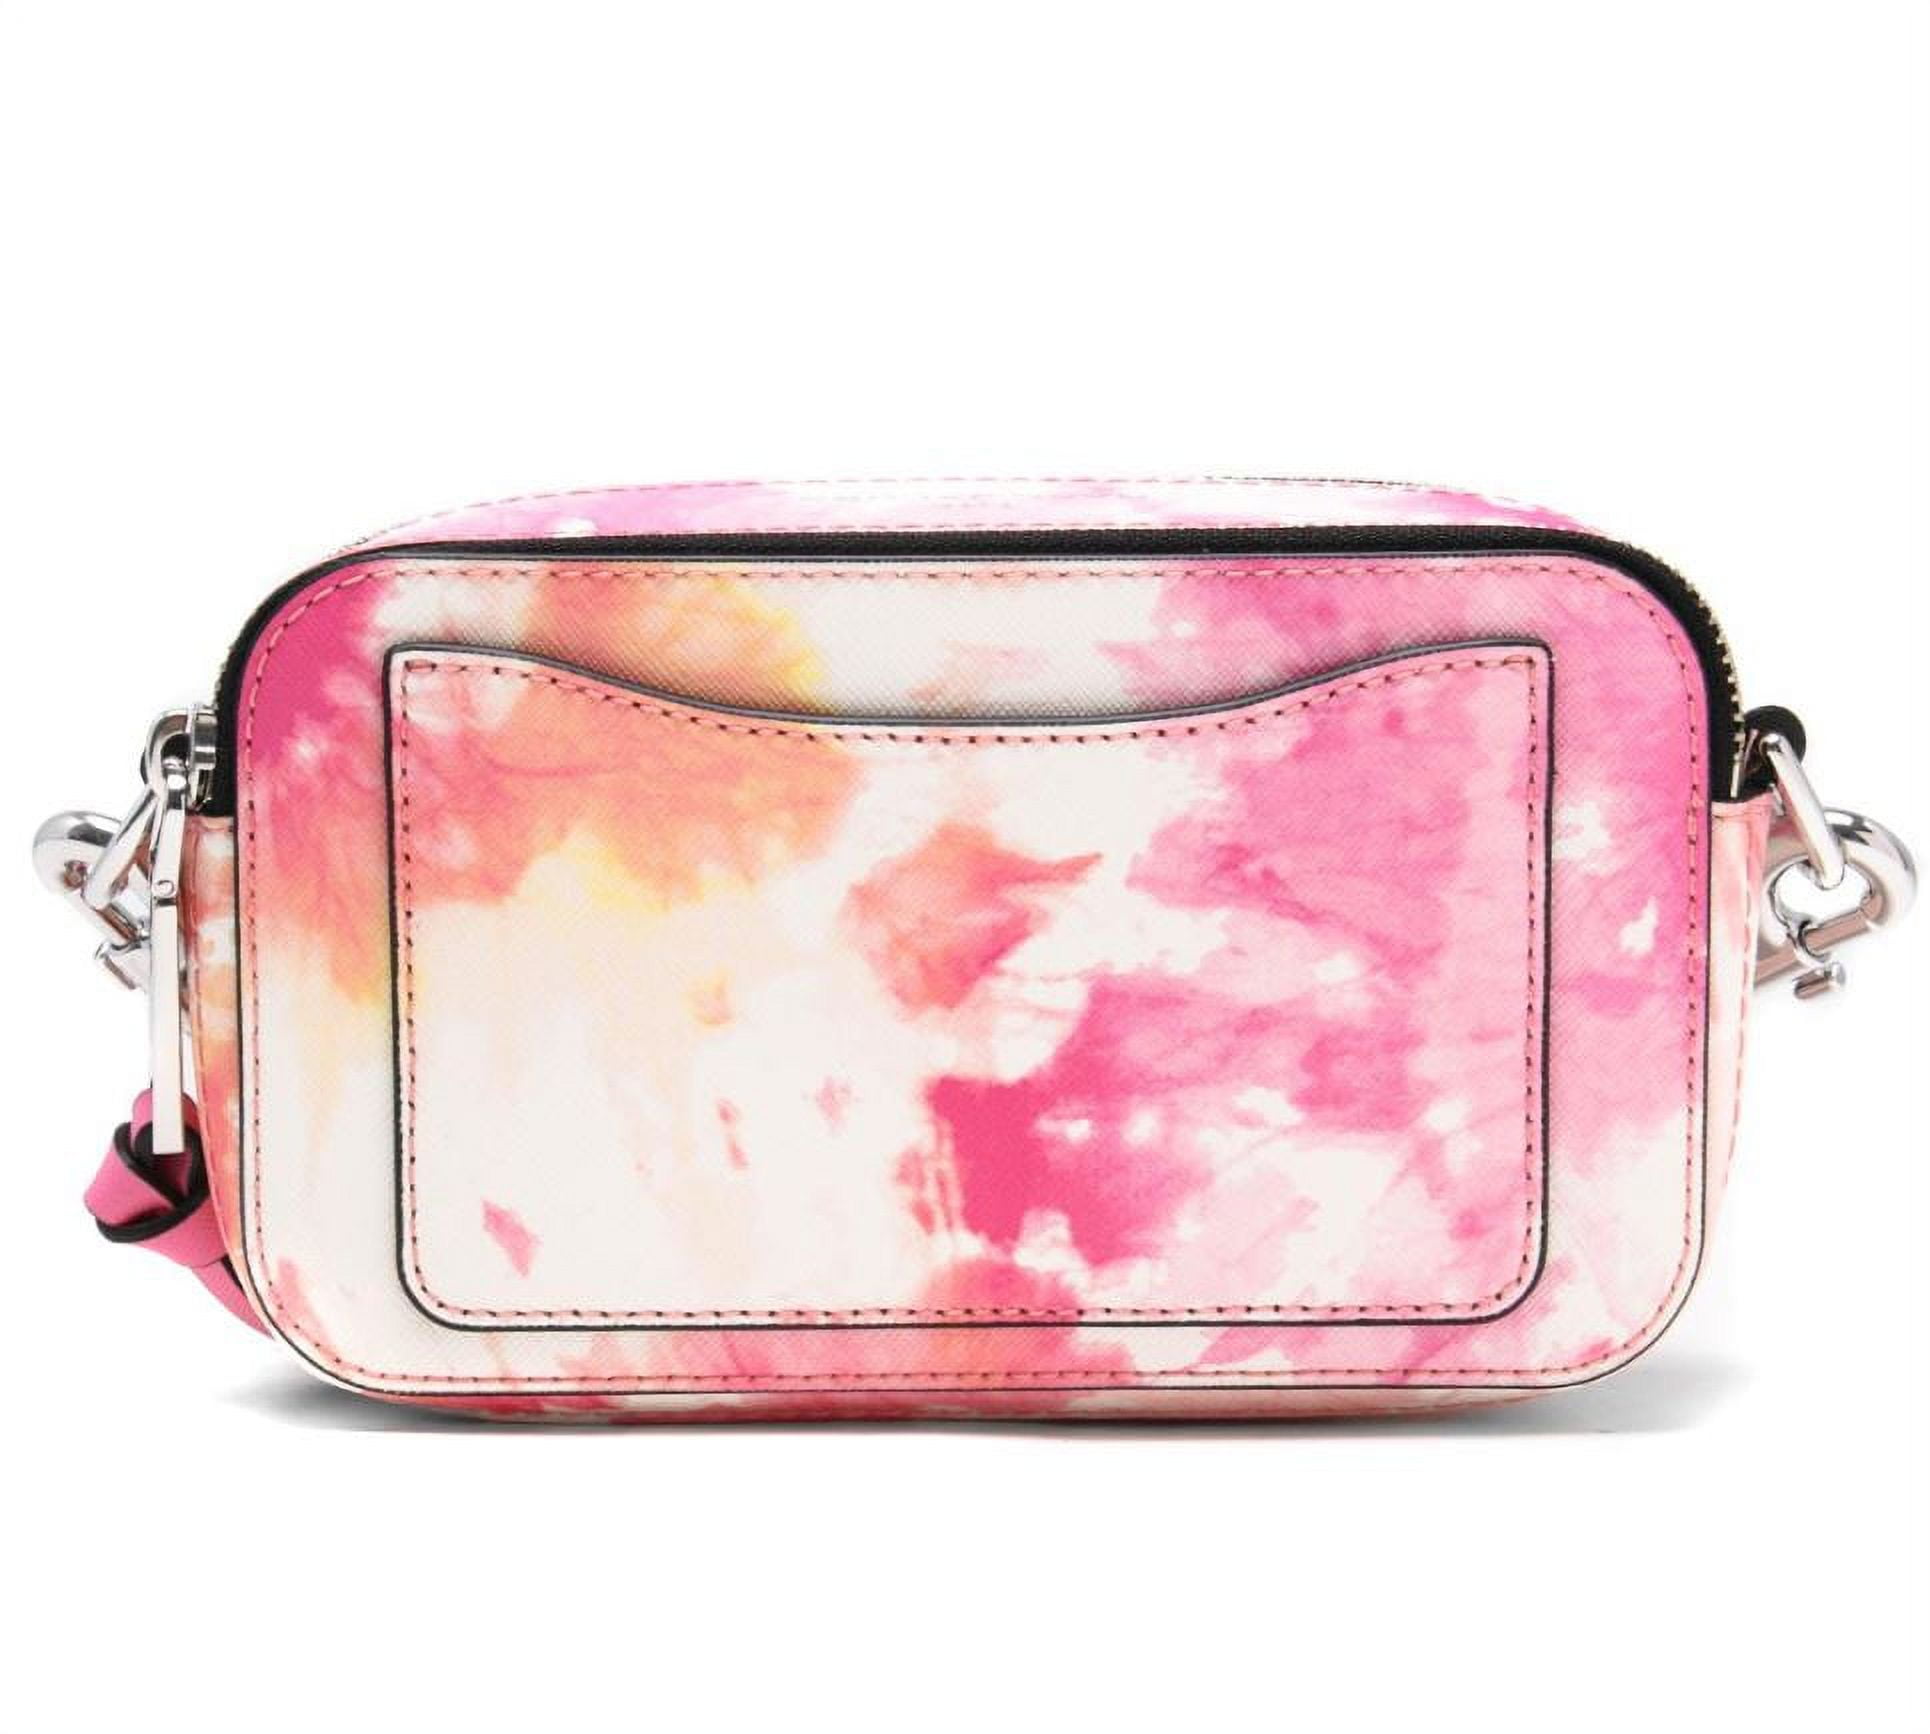 Trust Me—Buy These 22 Things  Marc jacobs snapshot bag, Marc